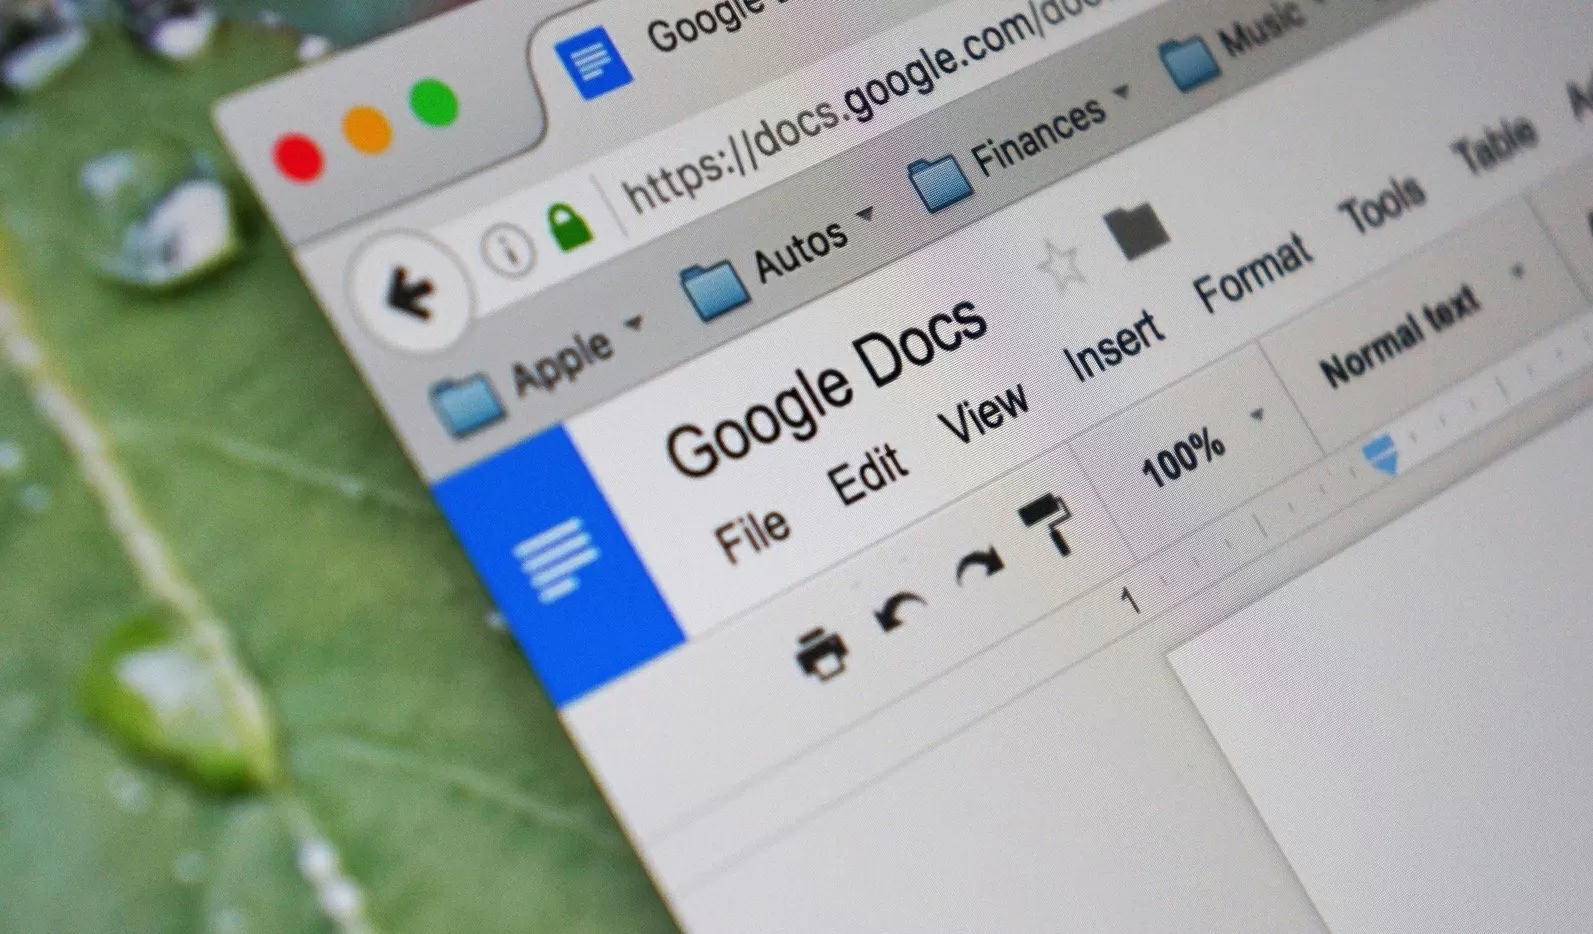 Google Docs is accidentally blocking access to documents